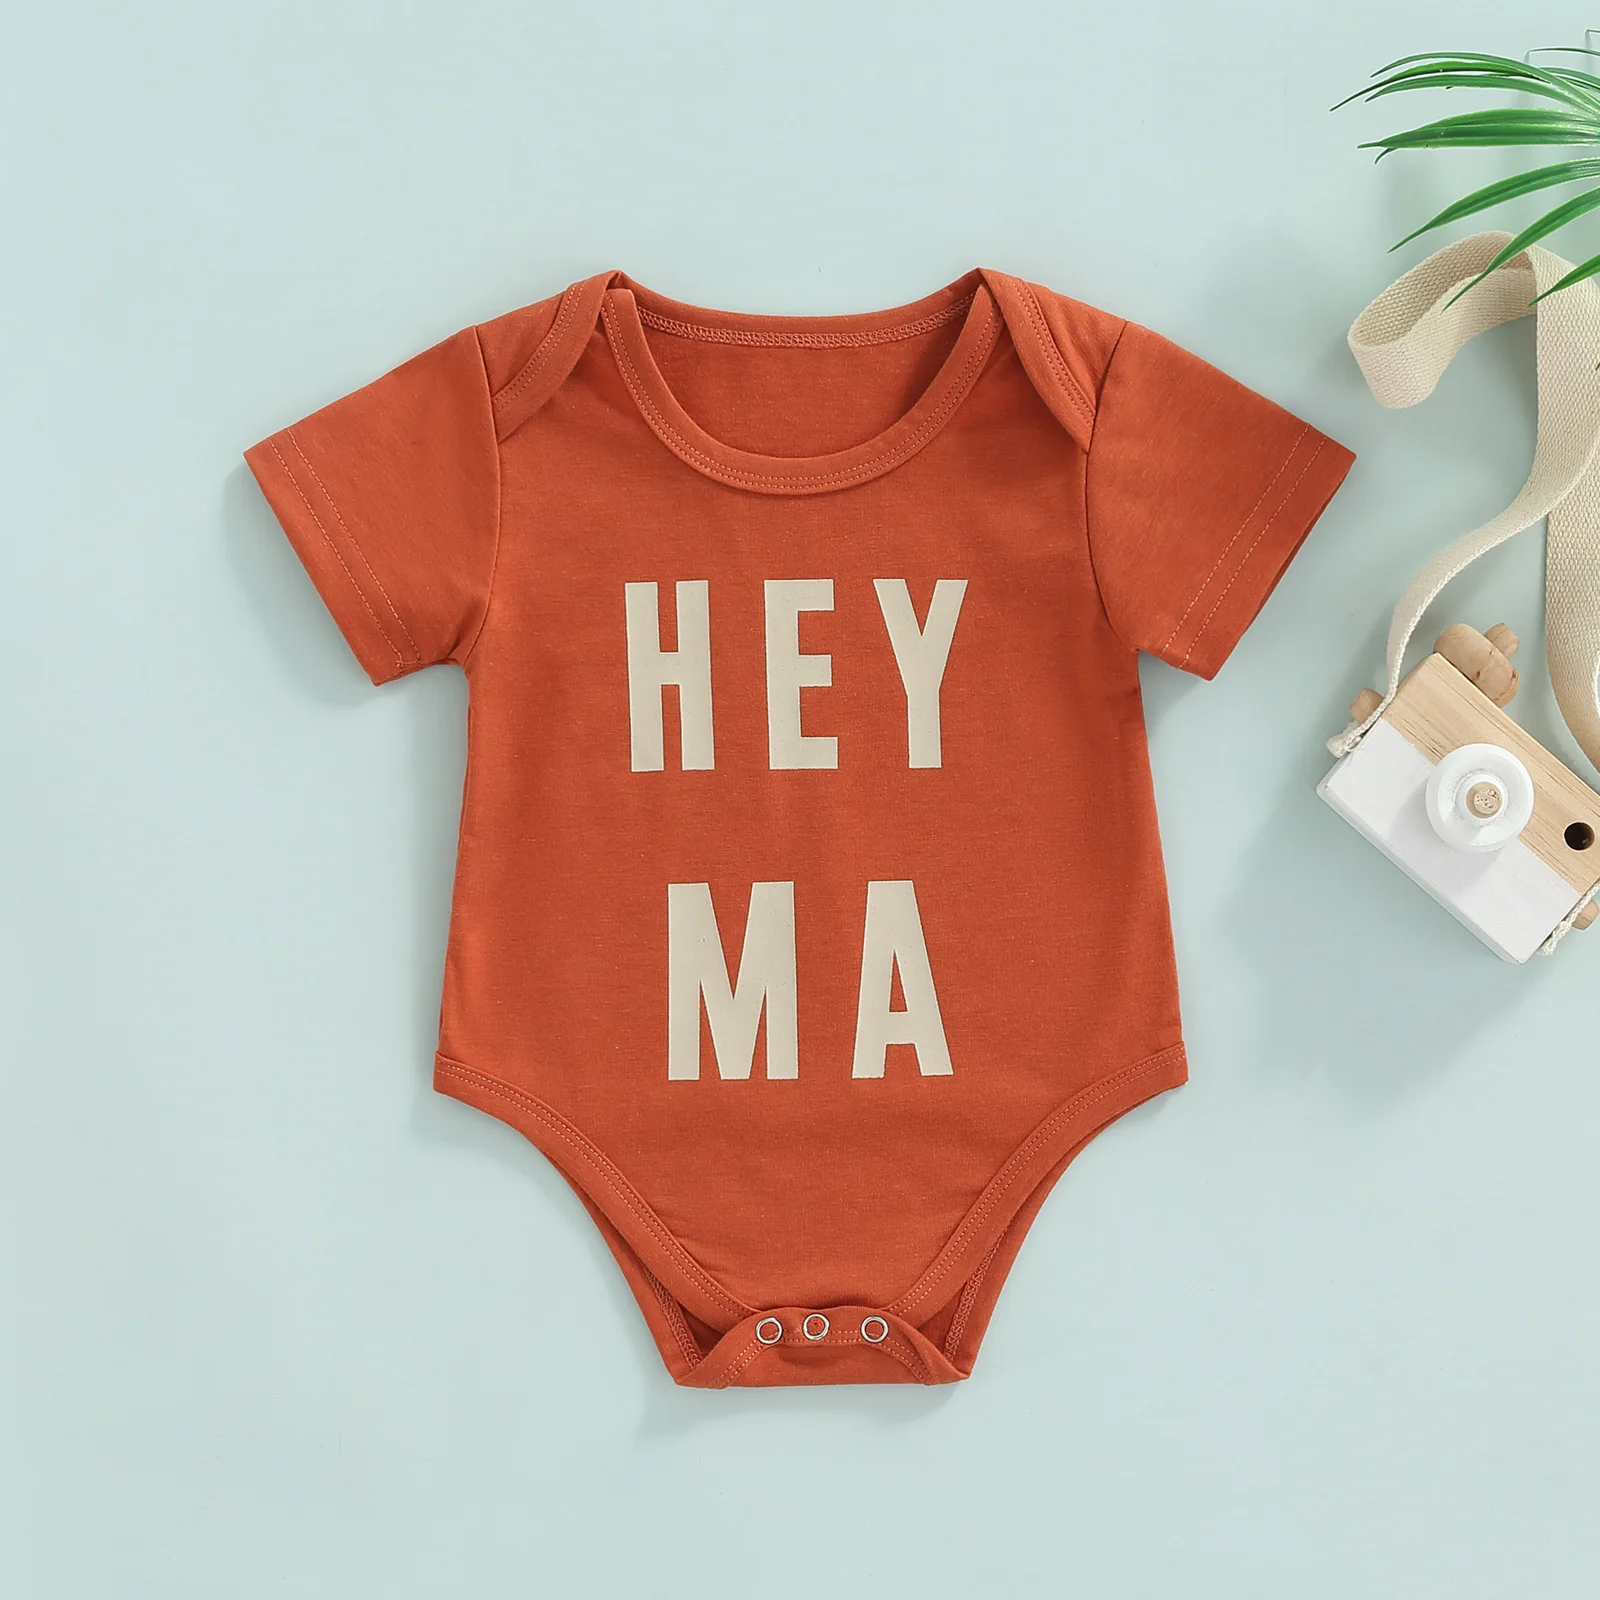 black baby bodysuits	 2022 0-18M HEY MA Casual lnfant Boy Girl Playsuit Letter Print Round Neck Short Sleeve Summer Romper Cotton Clothes Kids Outfit baby clothes cheap